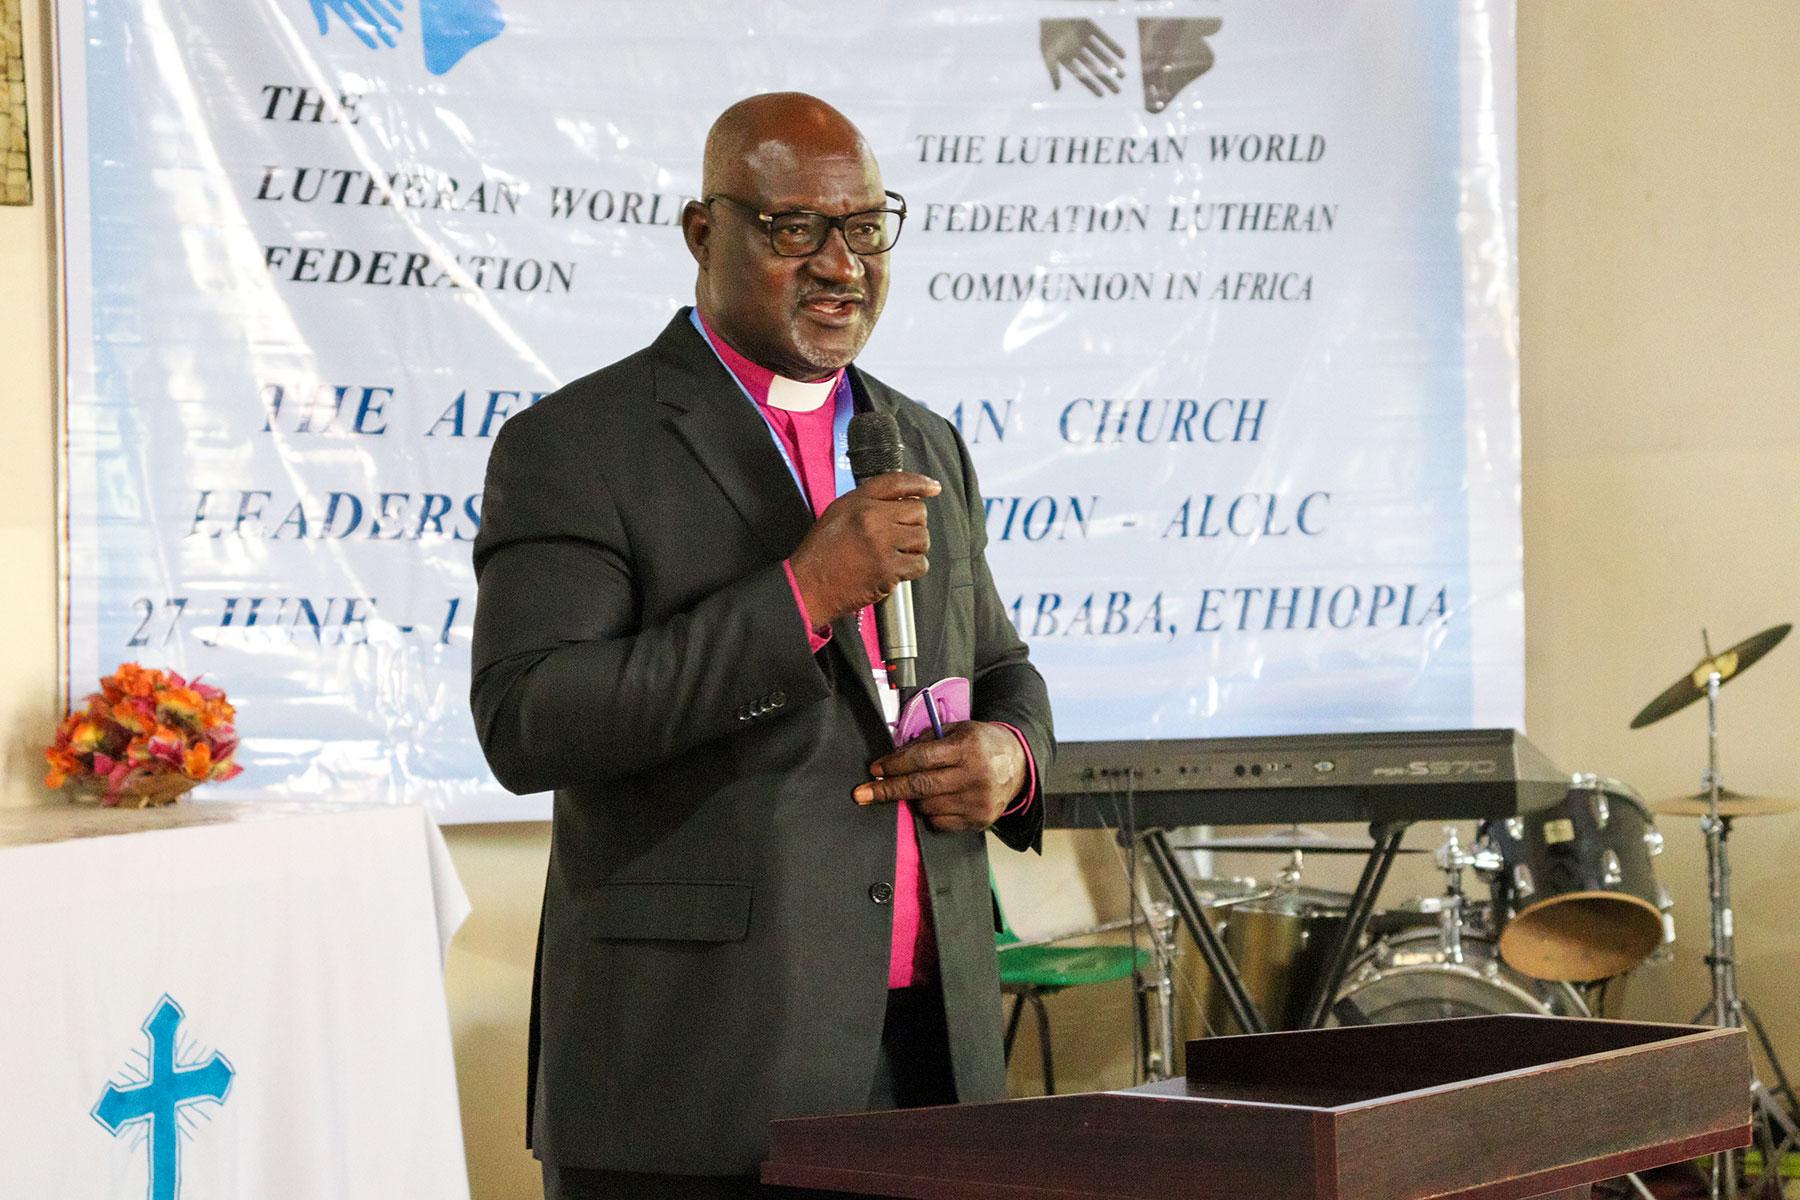 LWF President and Lutheran Church of Christ in Nigeria Archbishop Dr Panti Filibus Musa, addressing participants at the ALCLC in Addis Ababa, Ethiopia.